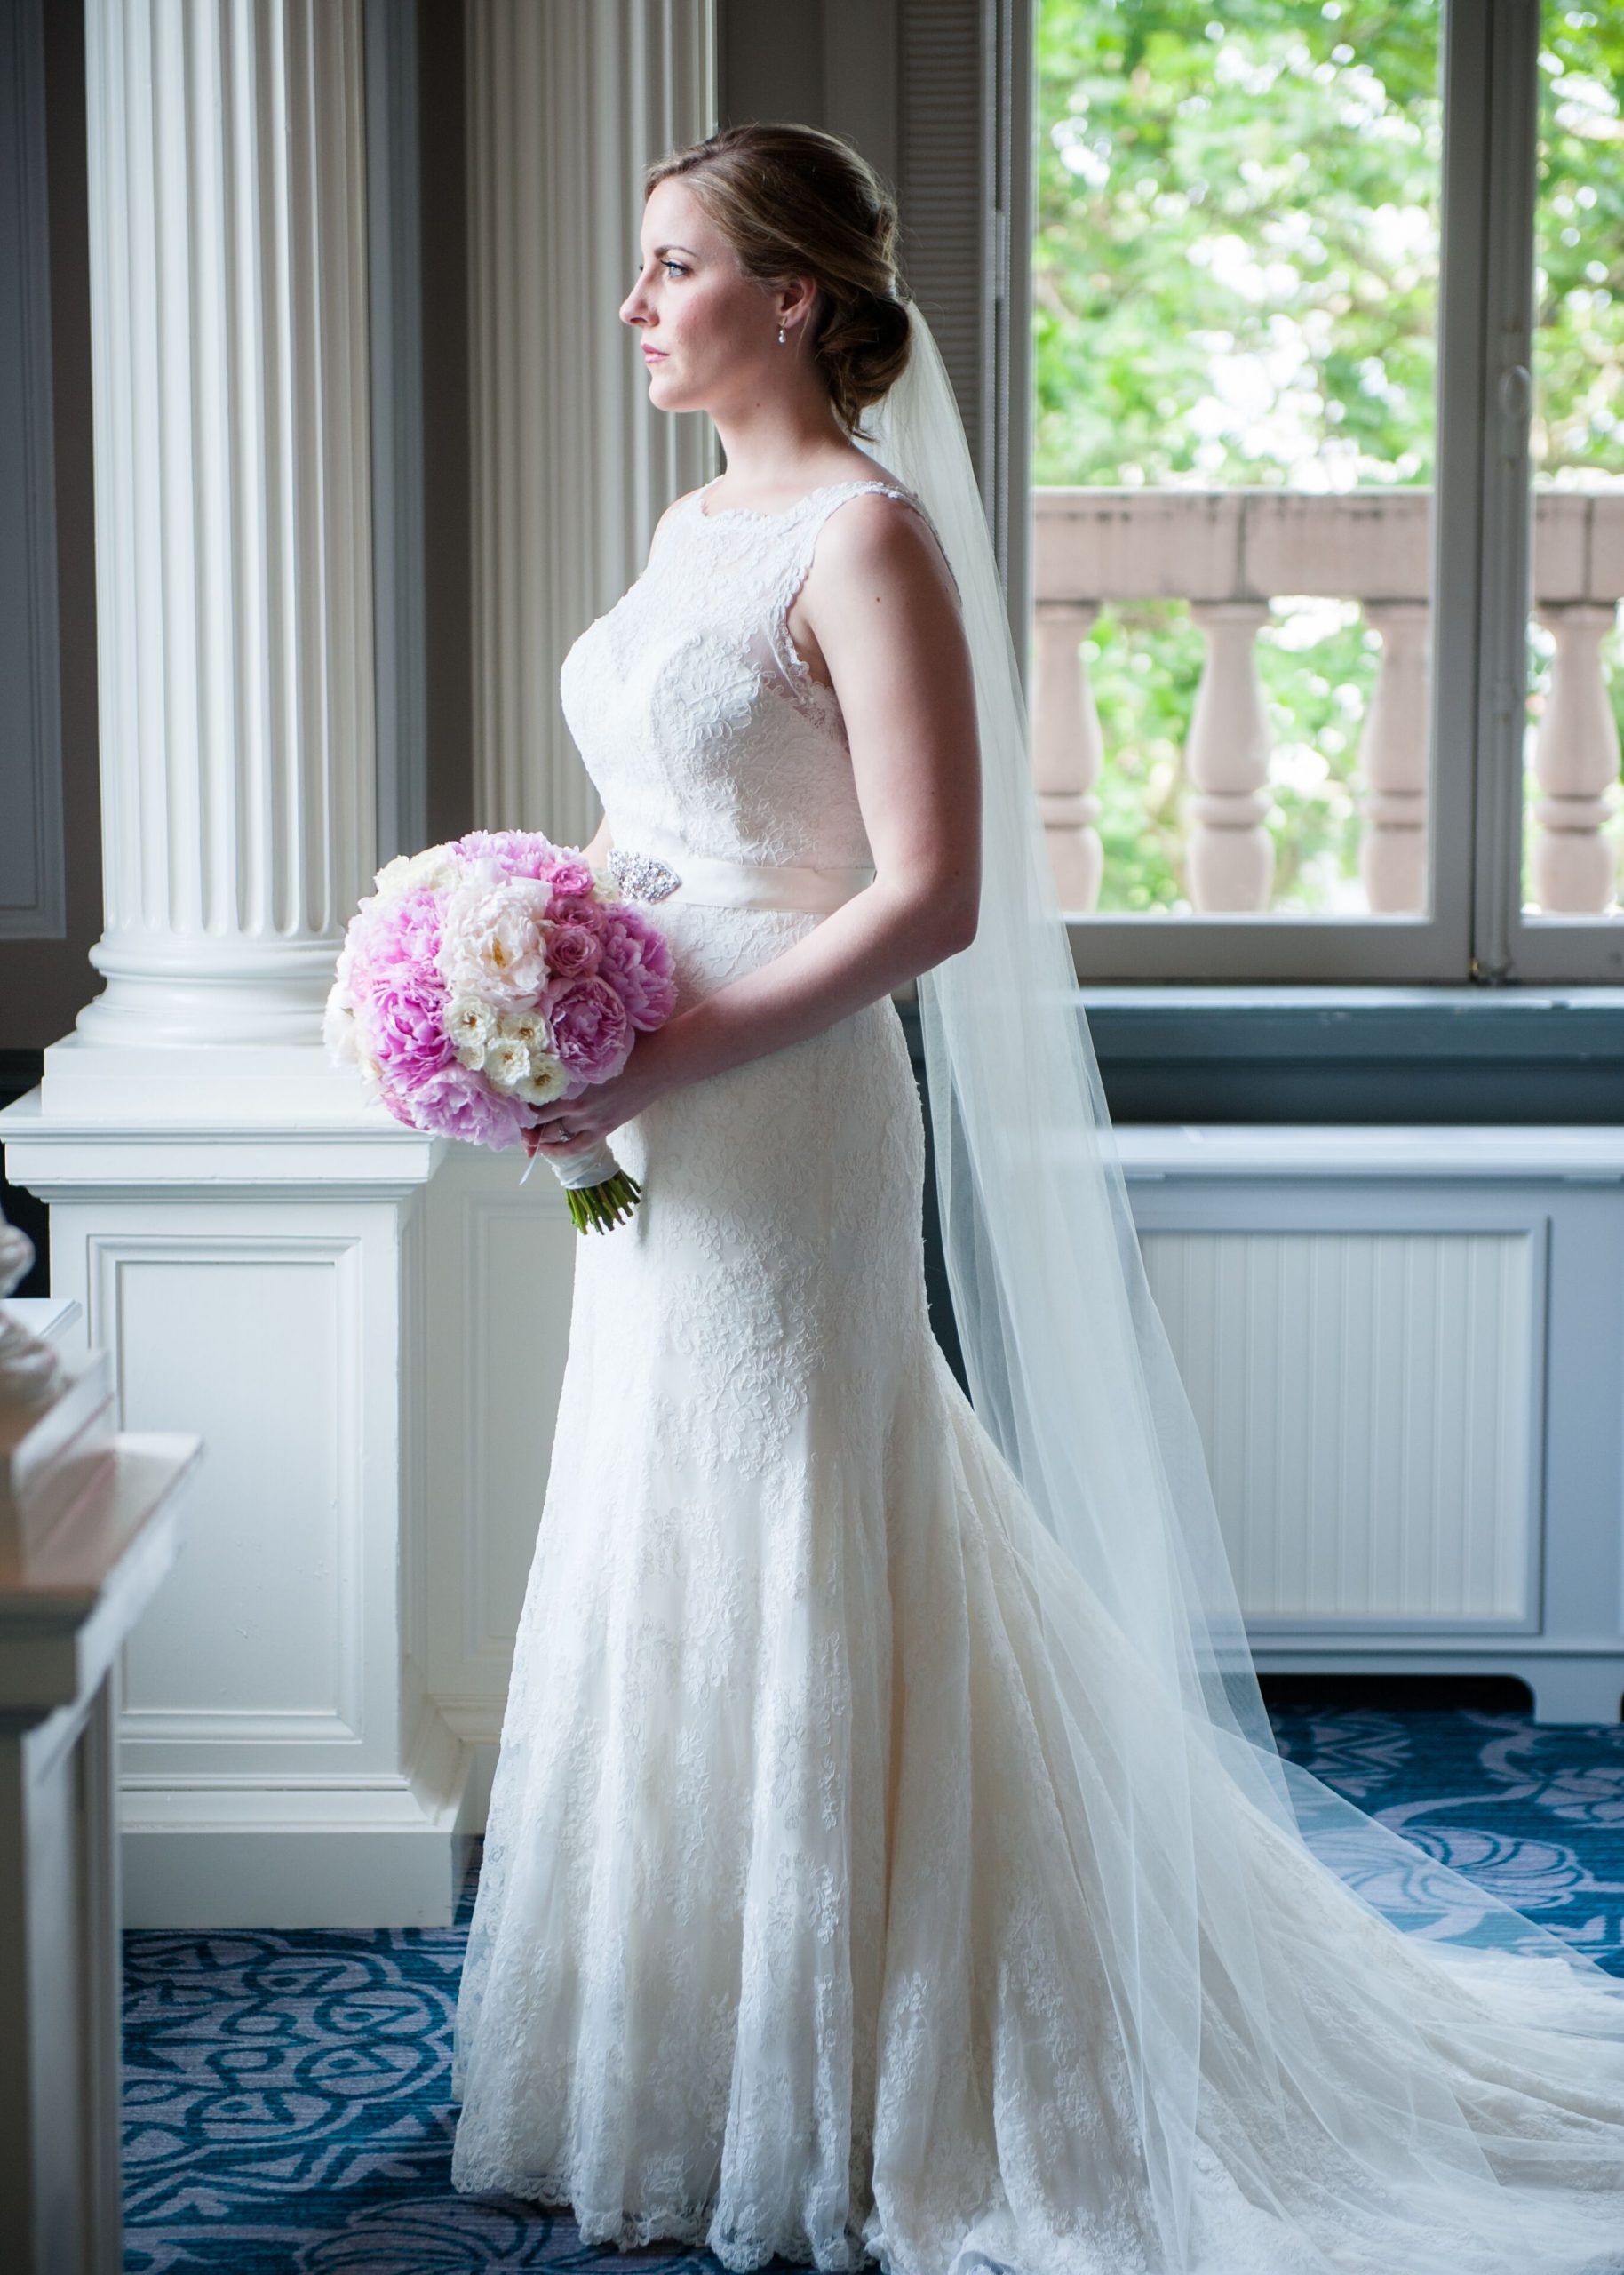 The Beauty Of The Lace Wedding Dresses